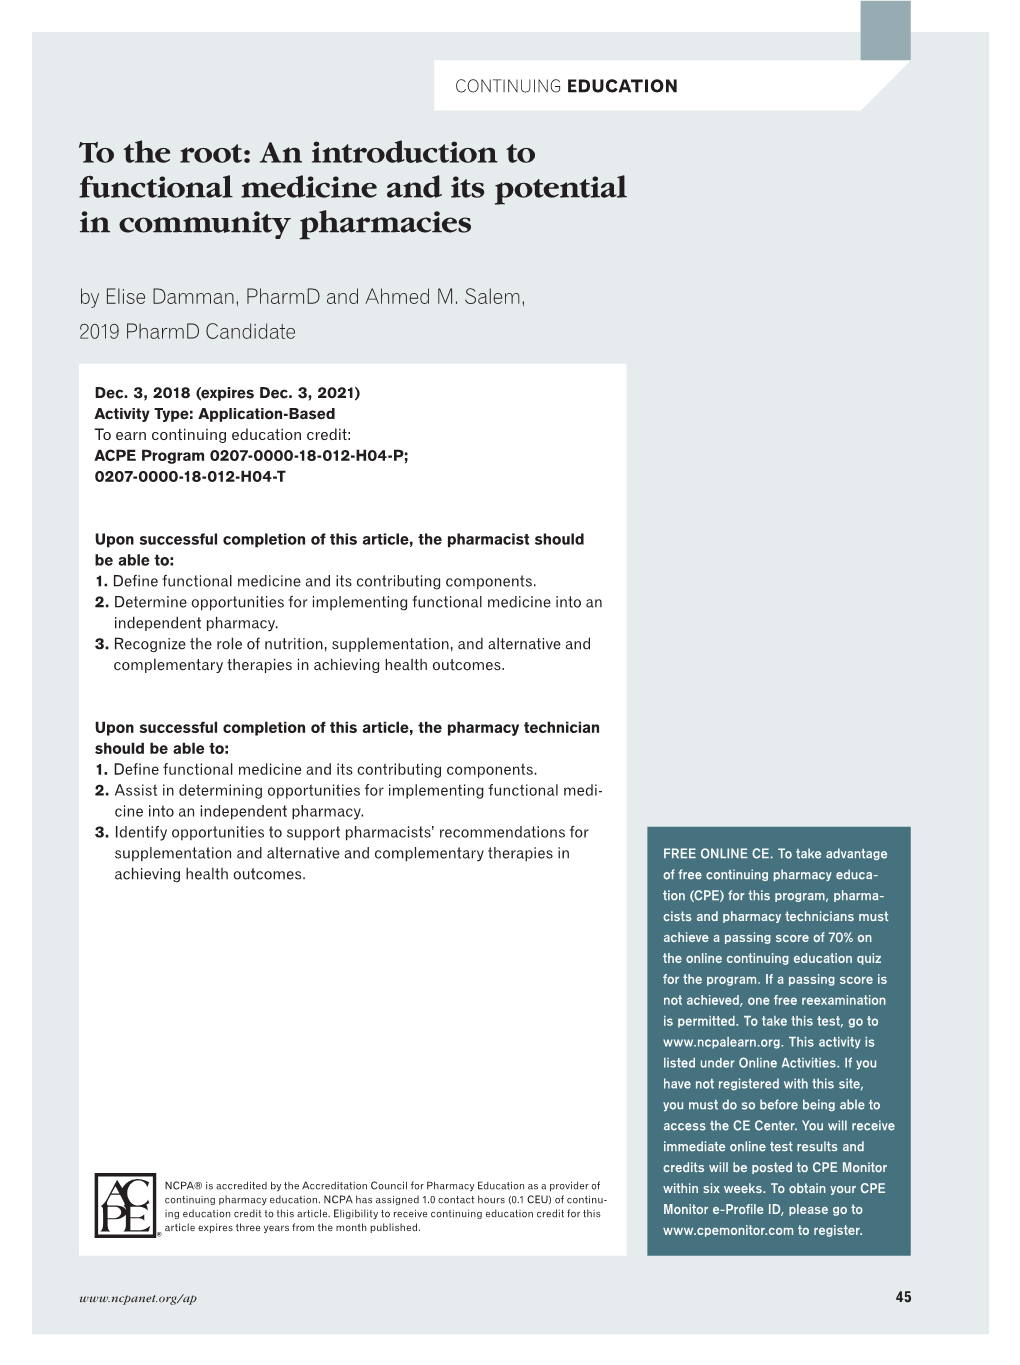 An Introduction to Functional Medicine and Its Potential in Community Pharmacies by Elise Damman, Pharmd and Ahmed M